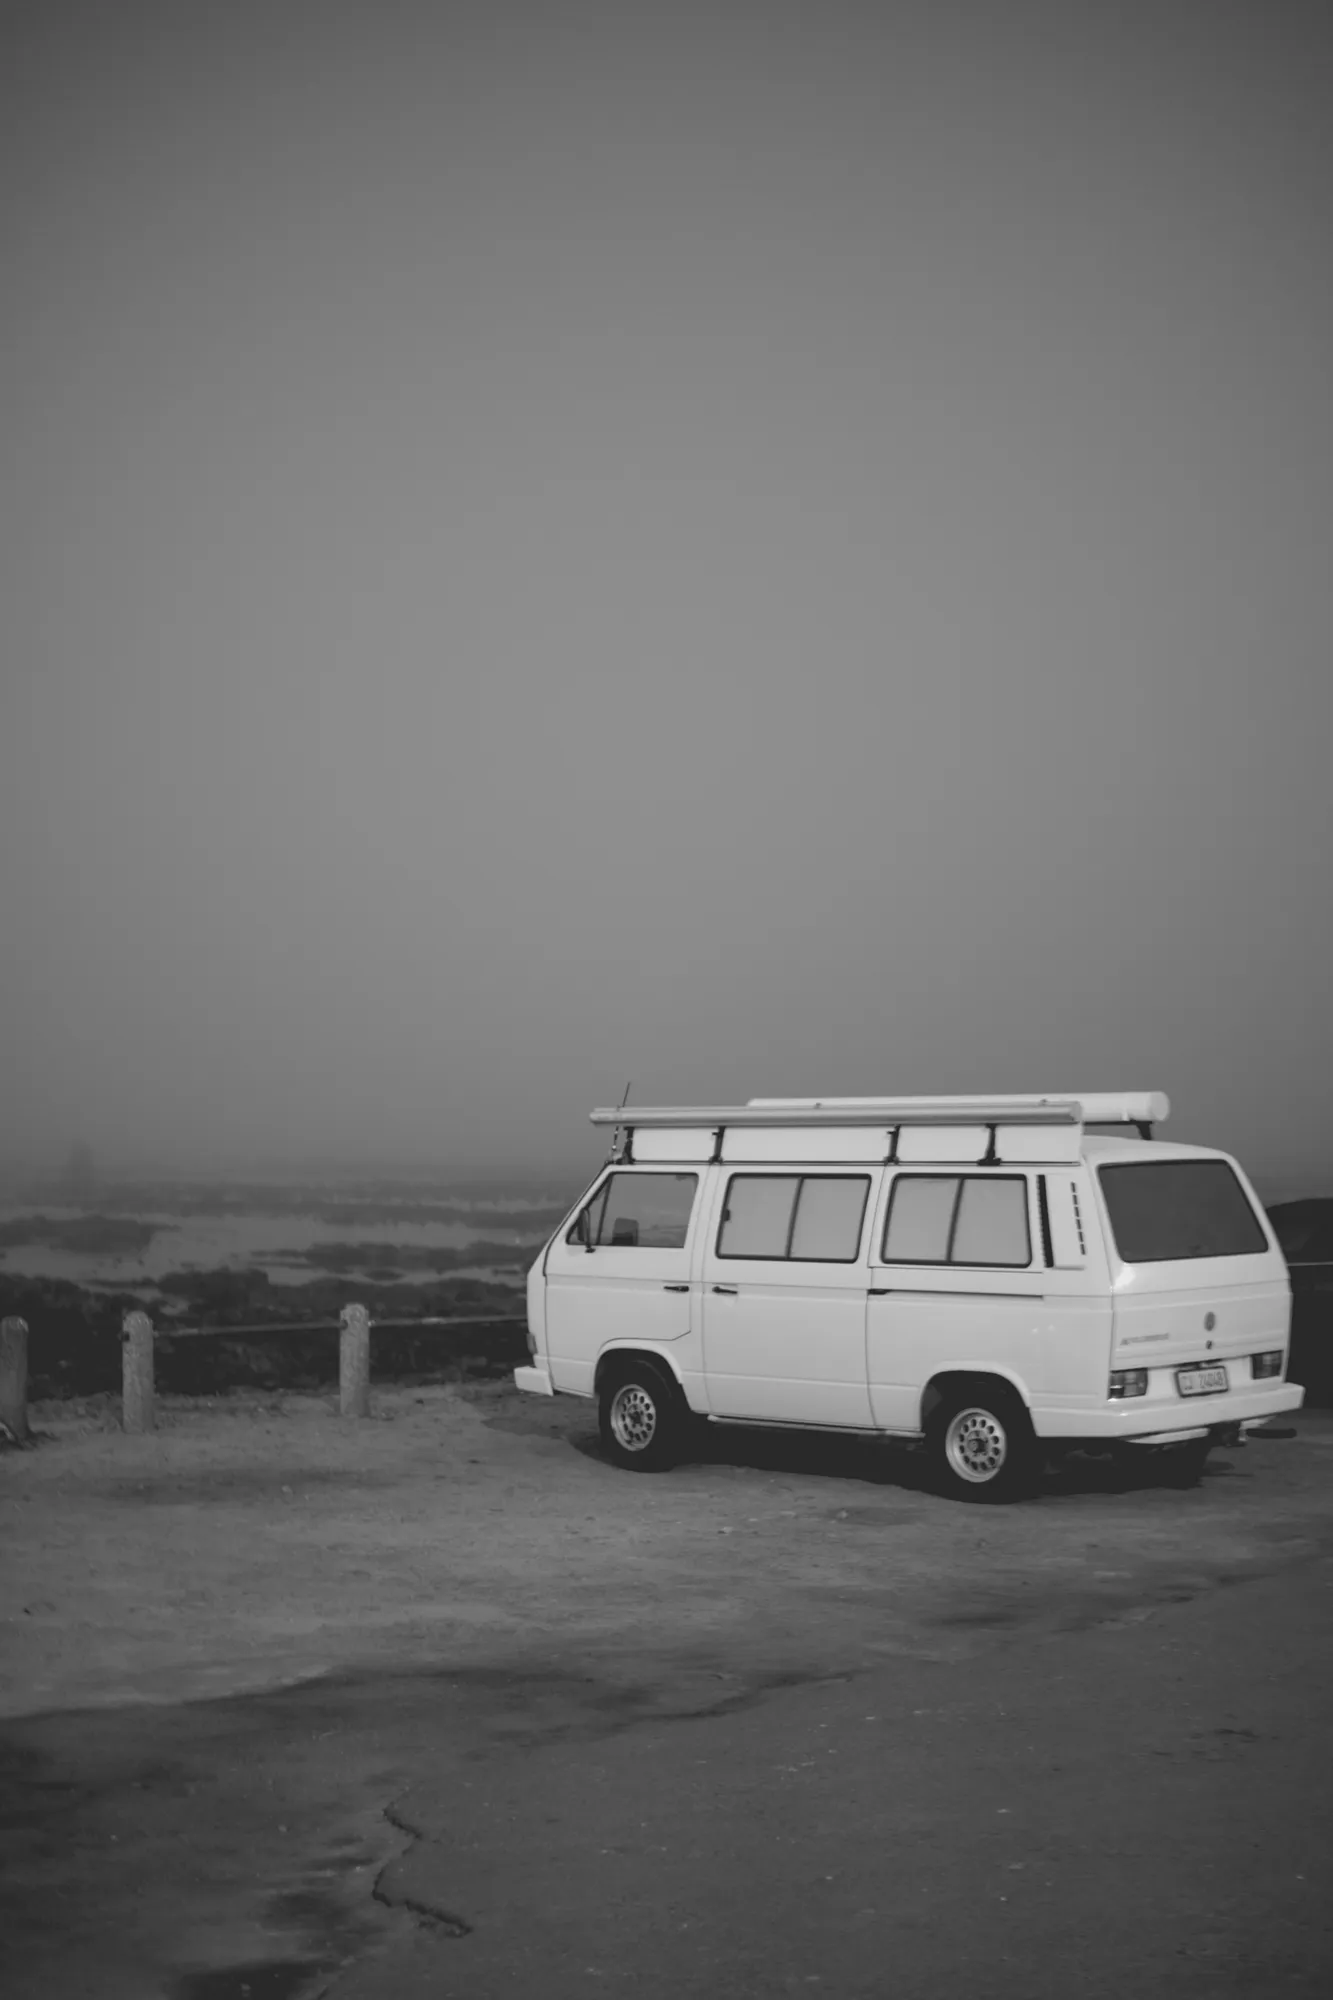 2022-02-15 - Cape Town - Van parked beside beach on misty day